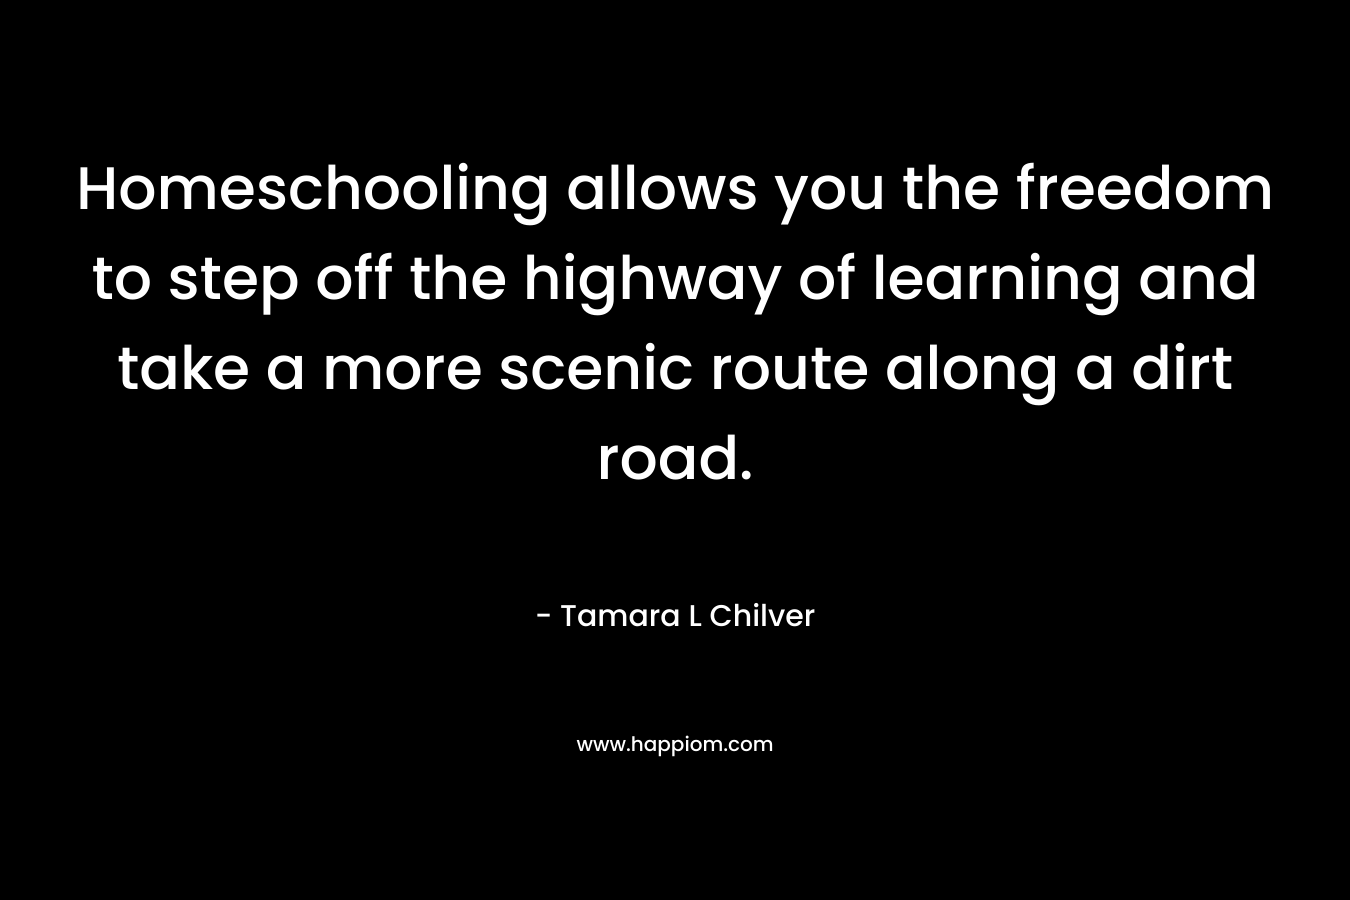 Homeschooling allows you the freedom to step off the highway of learning and take a more scenic route along a dirt road.